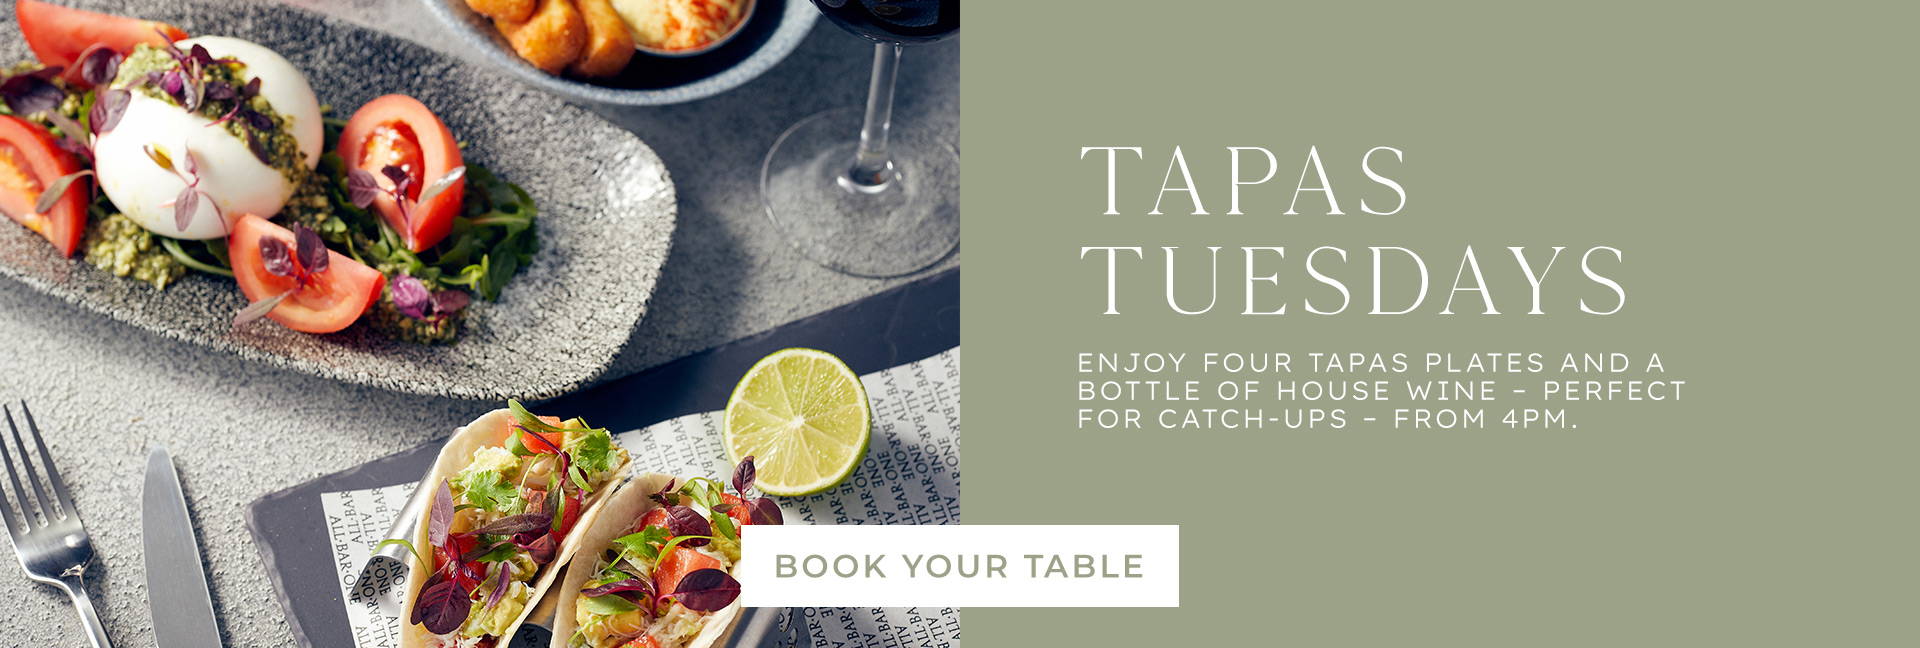 Tapas Tuesday at All Bar One Picton Place - Book now